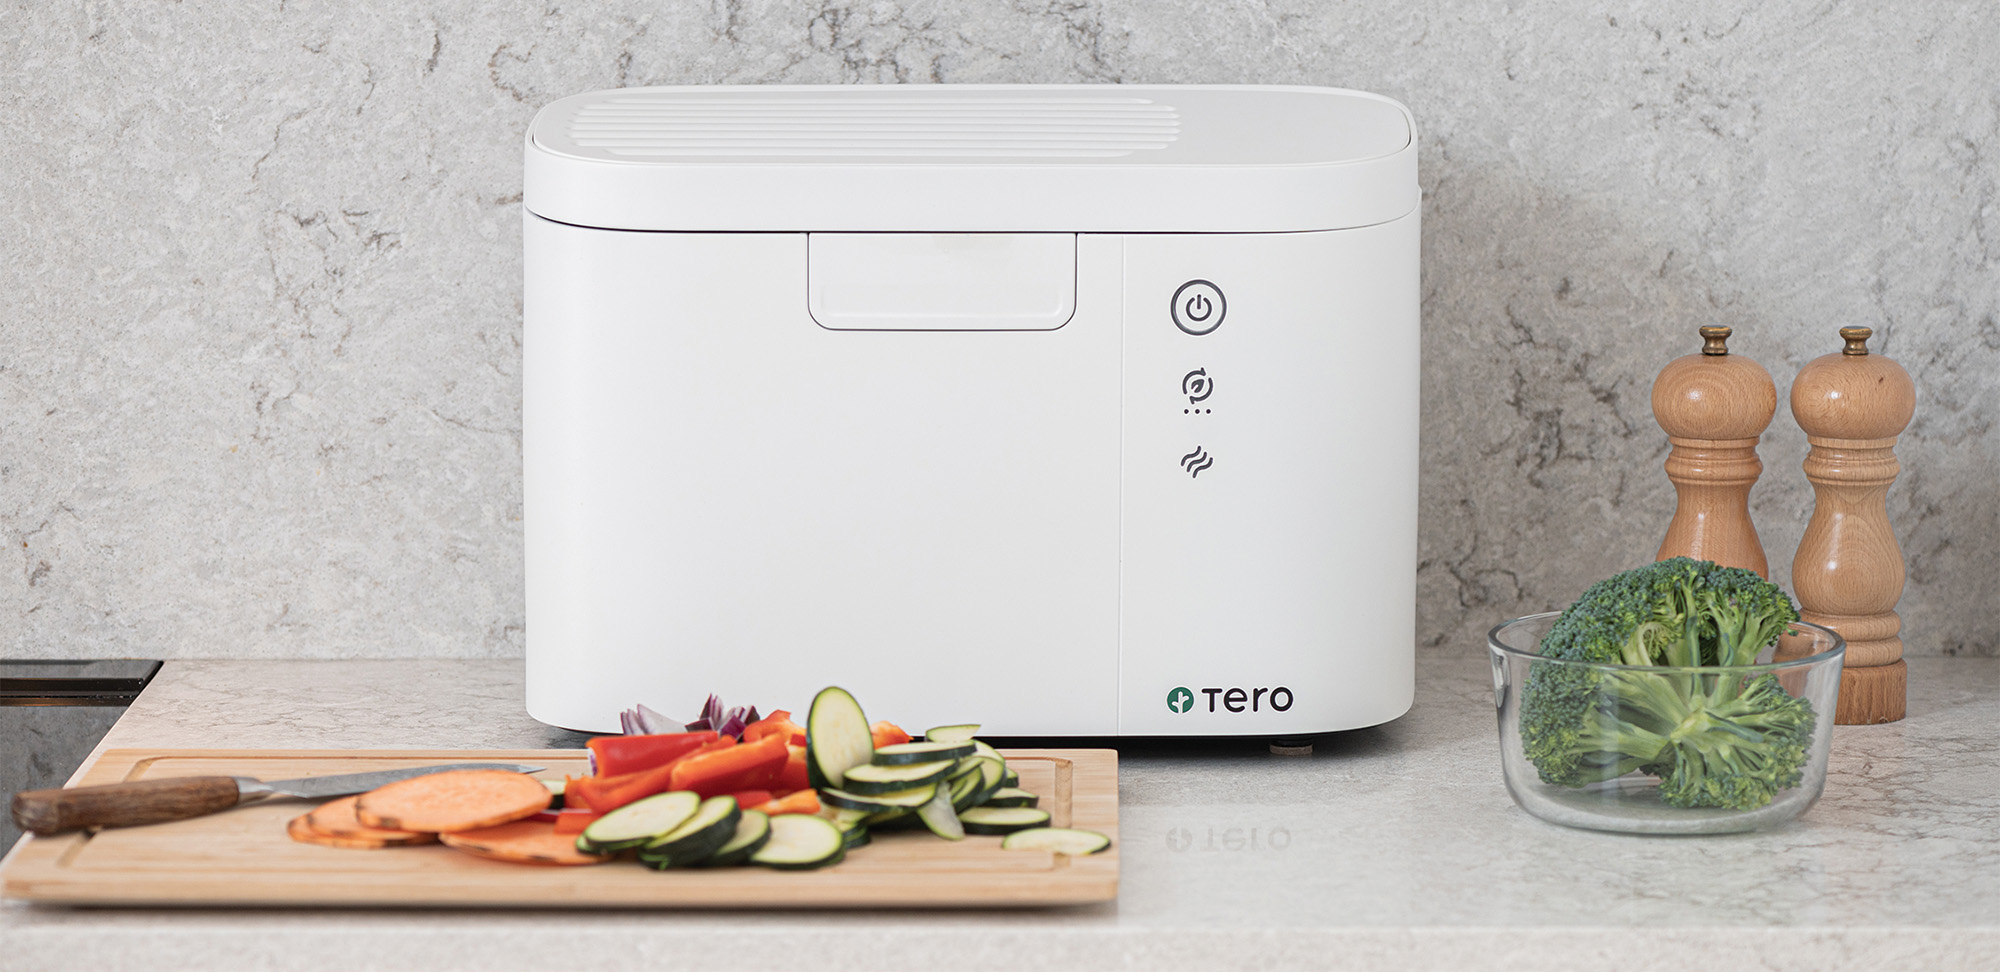 Countertop food composting device for your kitchen by Tero